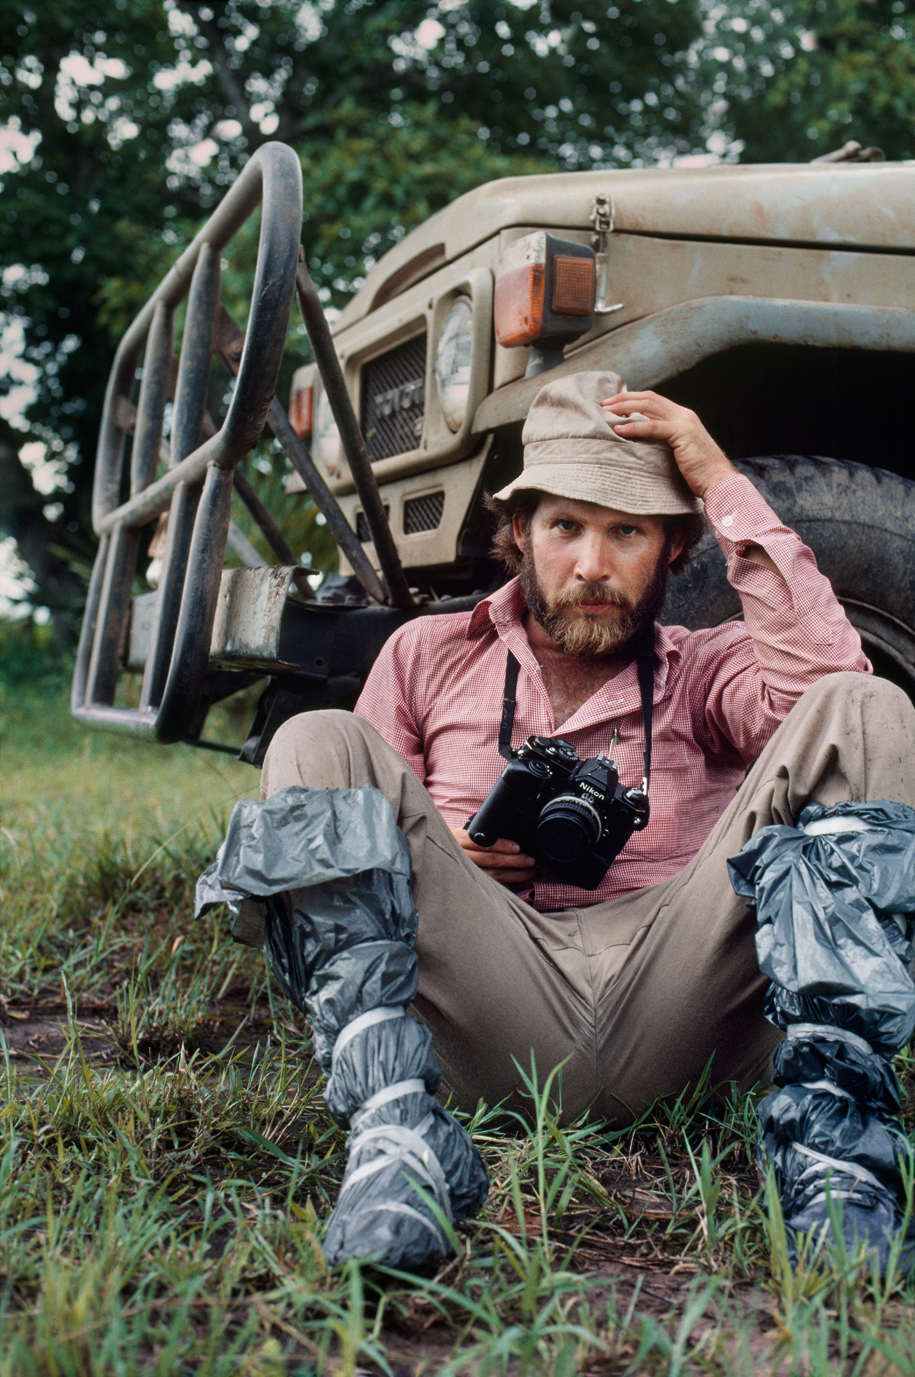 Steve Mc Curry in Australia, 1984 - as featured in Untold The Stories Behind The Photographs